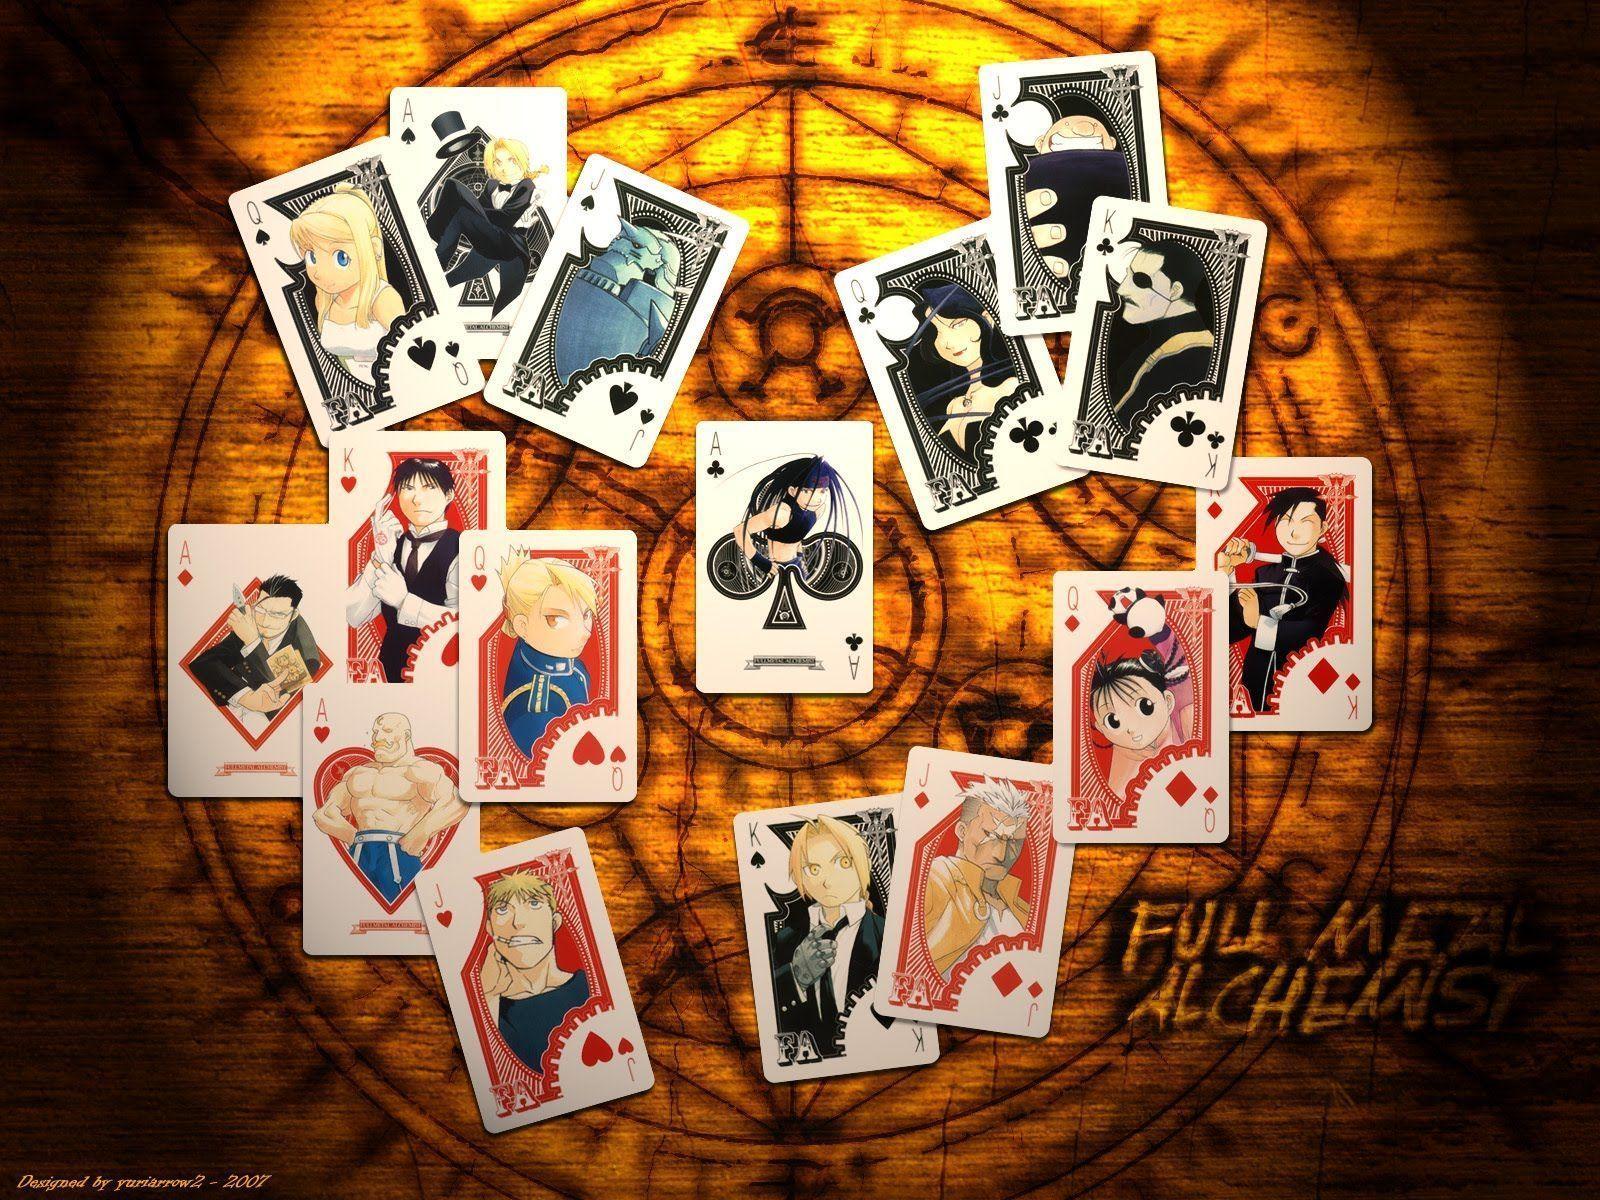 Fullmetal Alchemist Awesome HD Wallpapers